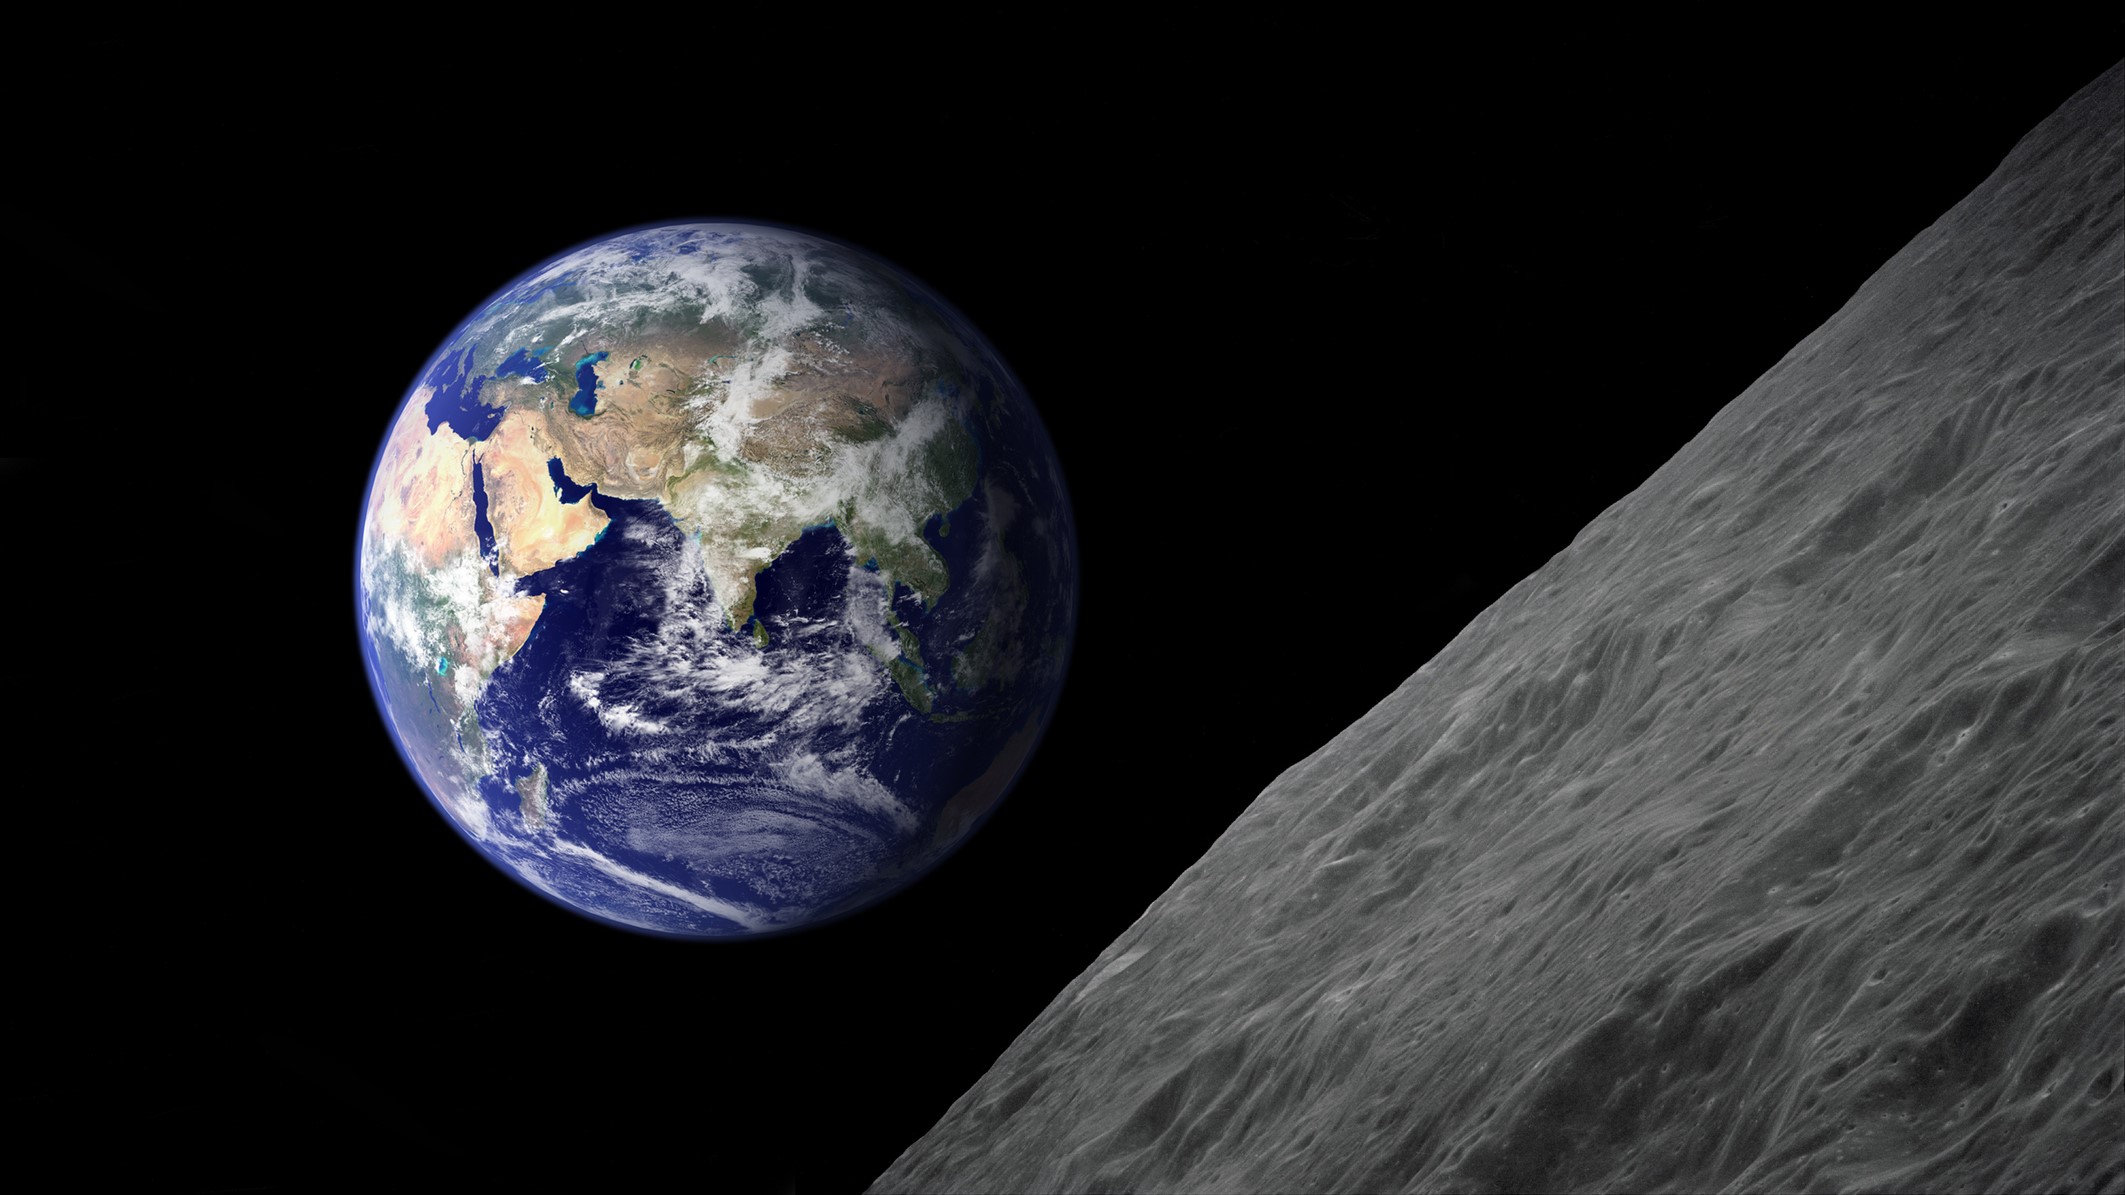 Did you know that all of the planets in the solar system could fit between Earth and our moon?